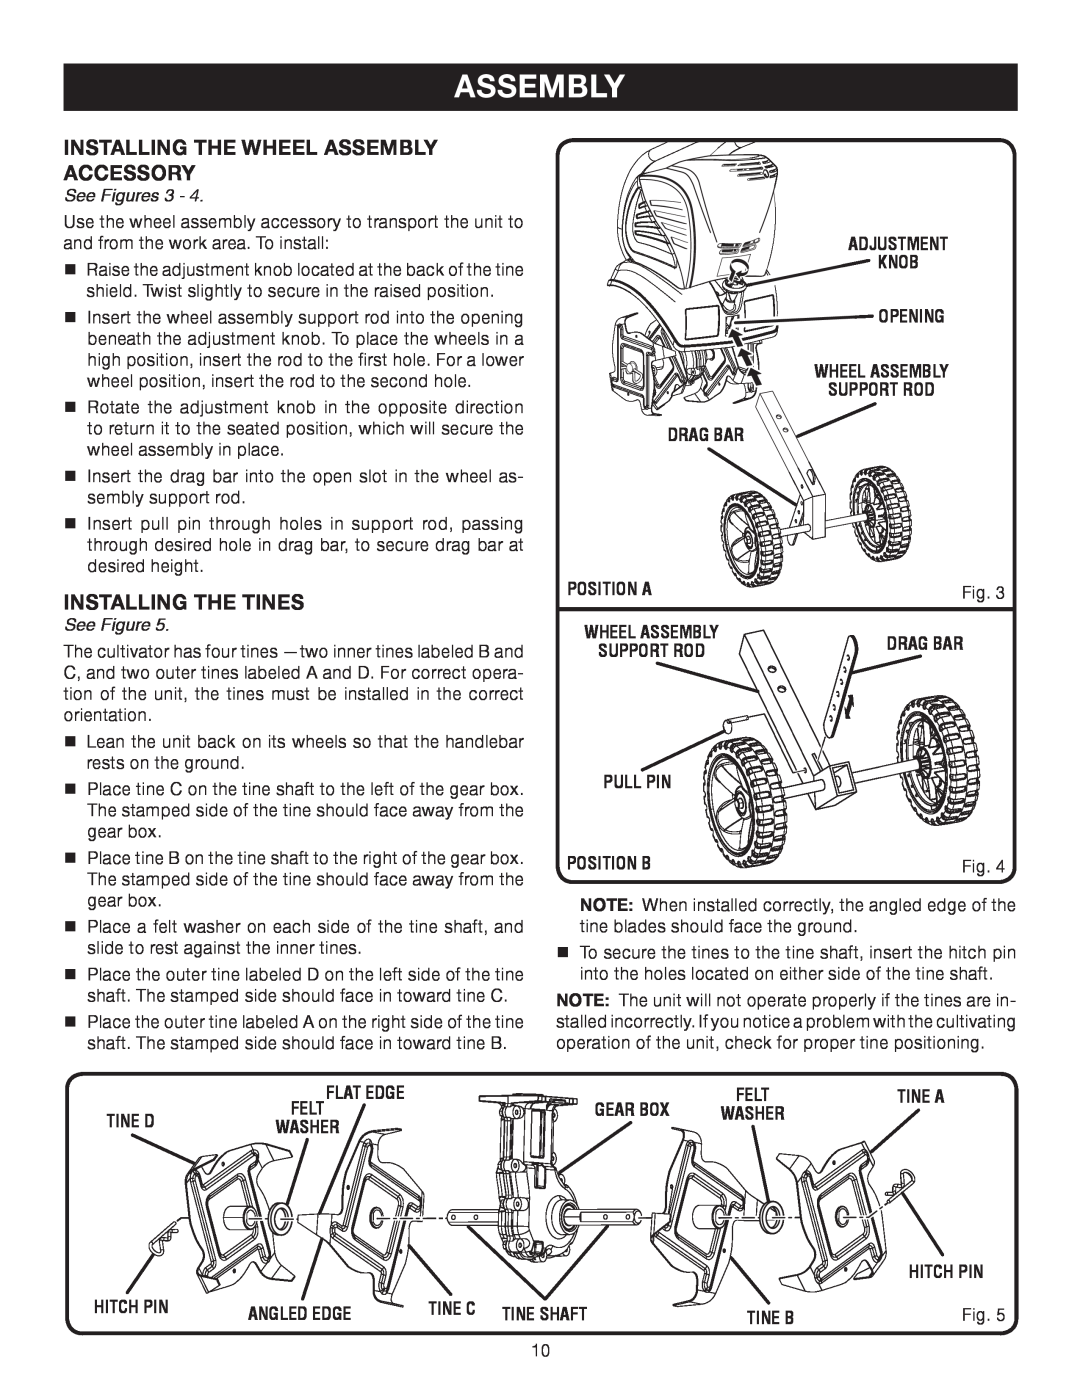 Ryobi Outdoor RY46501B Installing The Wheel Assembly Accessory, Installing The Tines, See Figures, Tine D, Washer, Tine C 